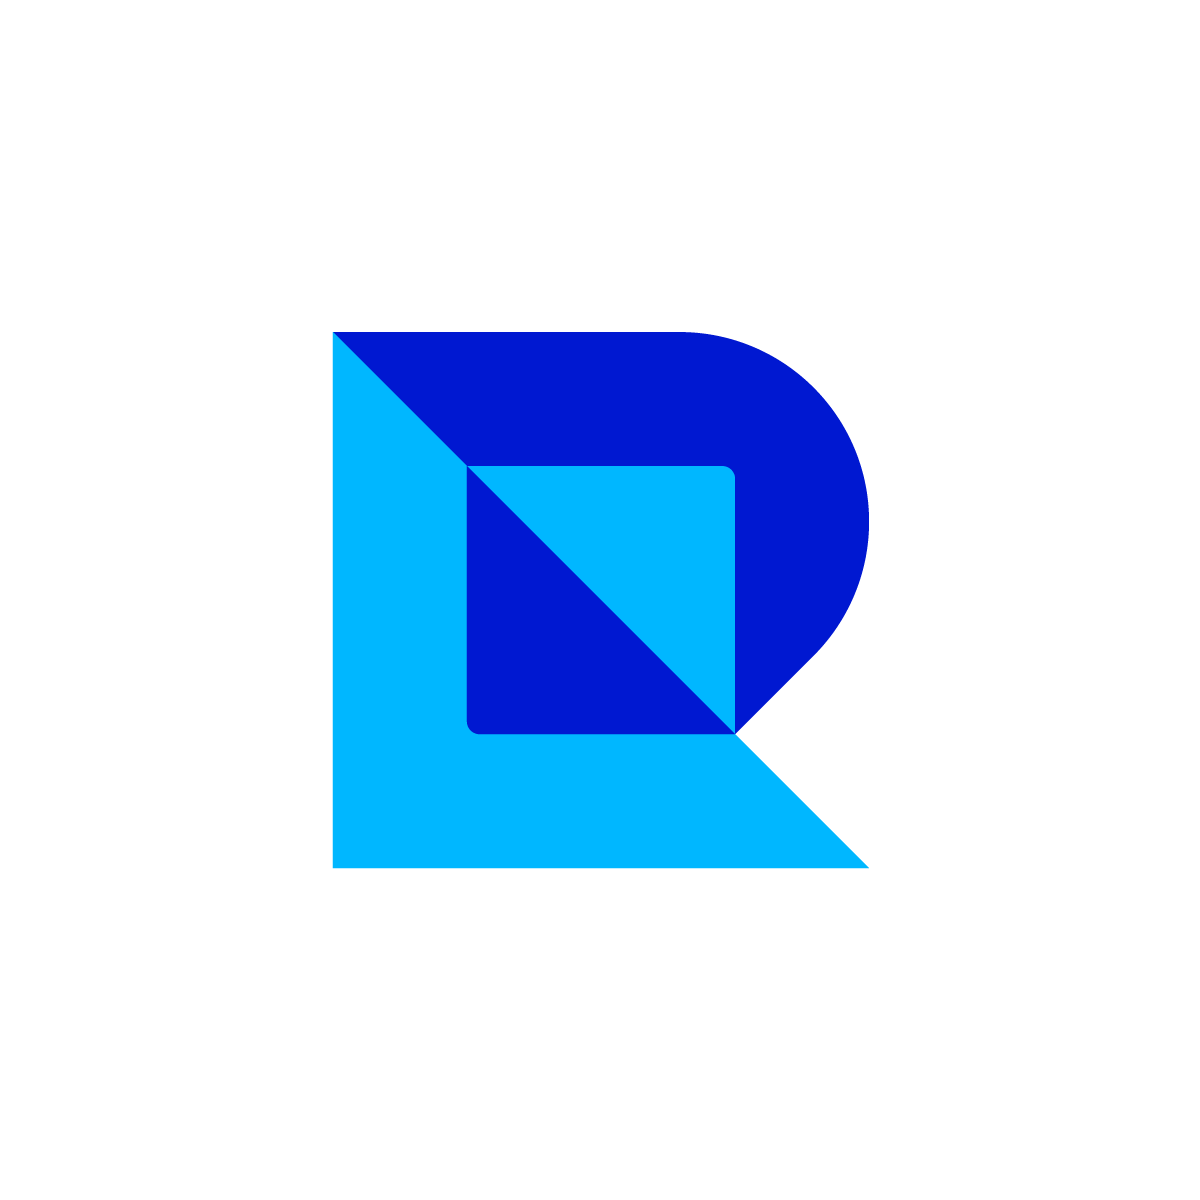 R Arrows Logo combines a modern 'R' with mirrored arrows, symbolizing precision and dynamic movement for tech and innovative brands.